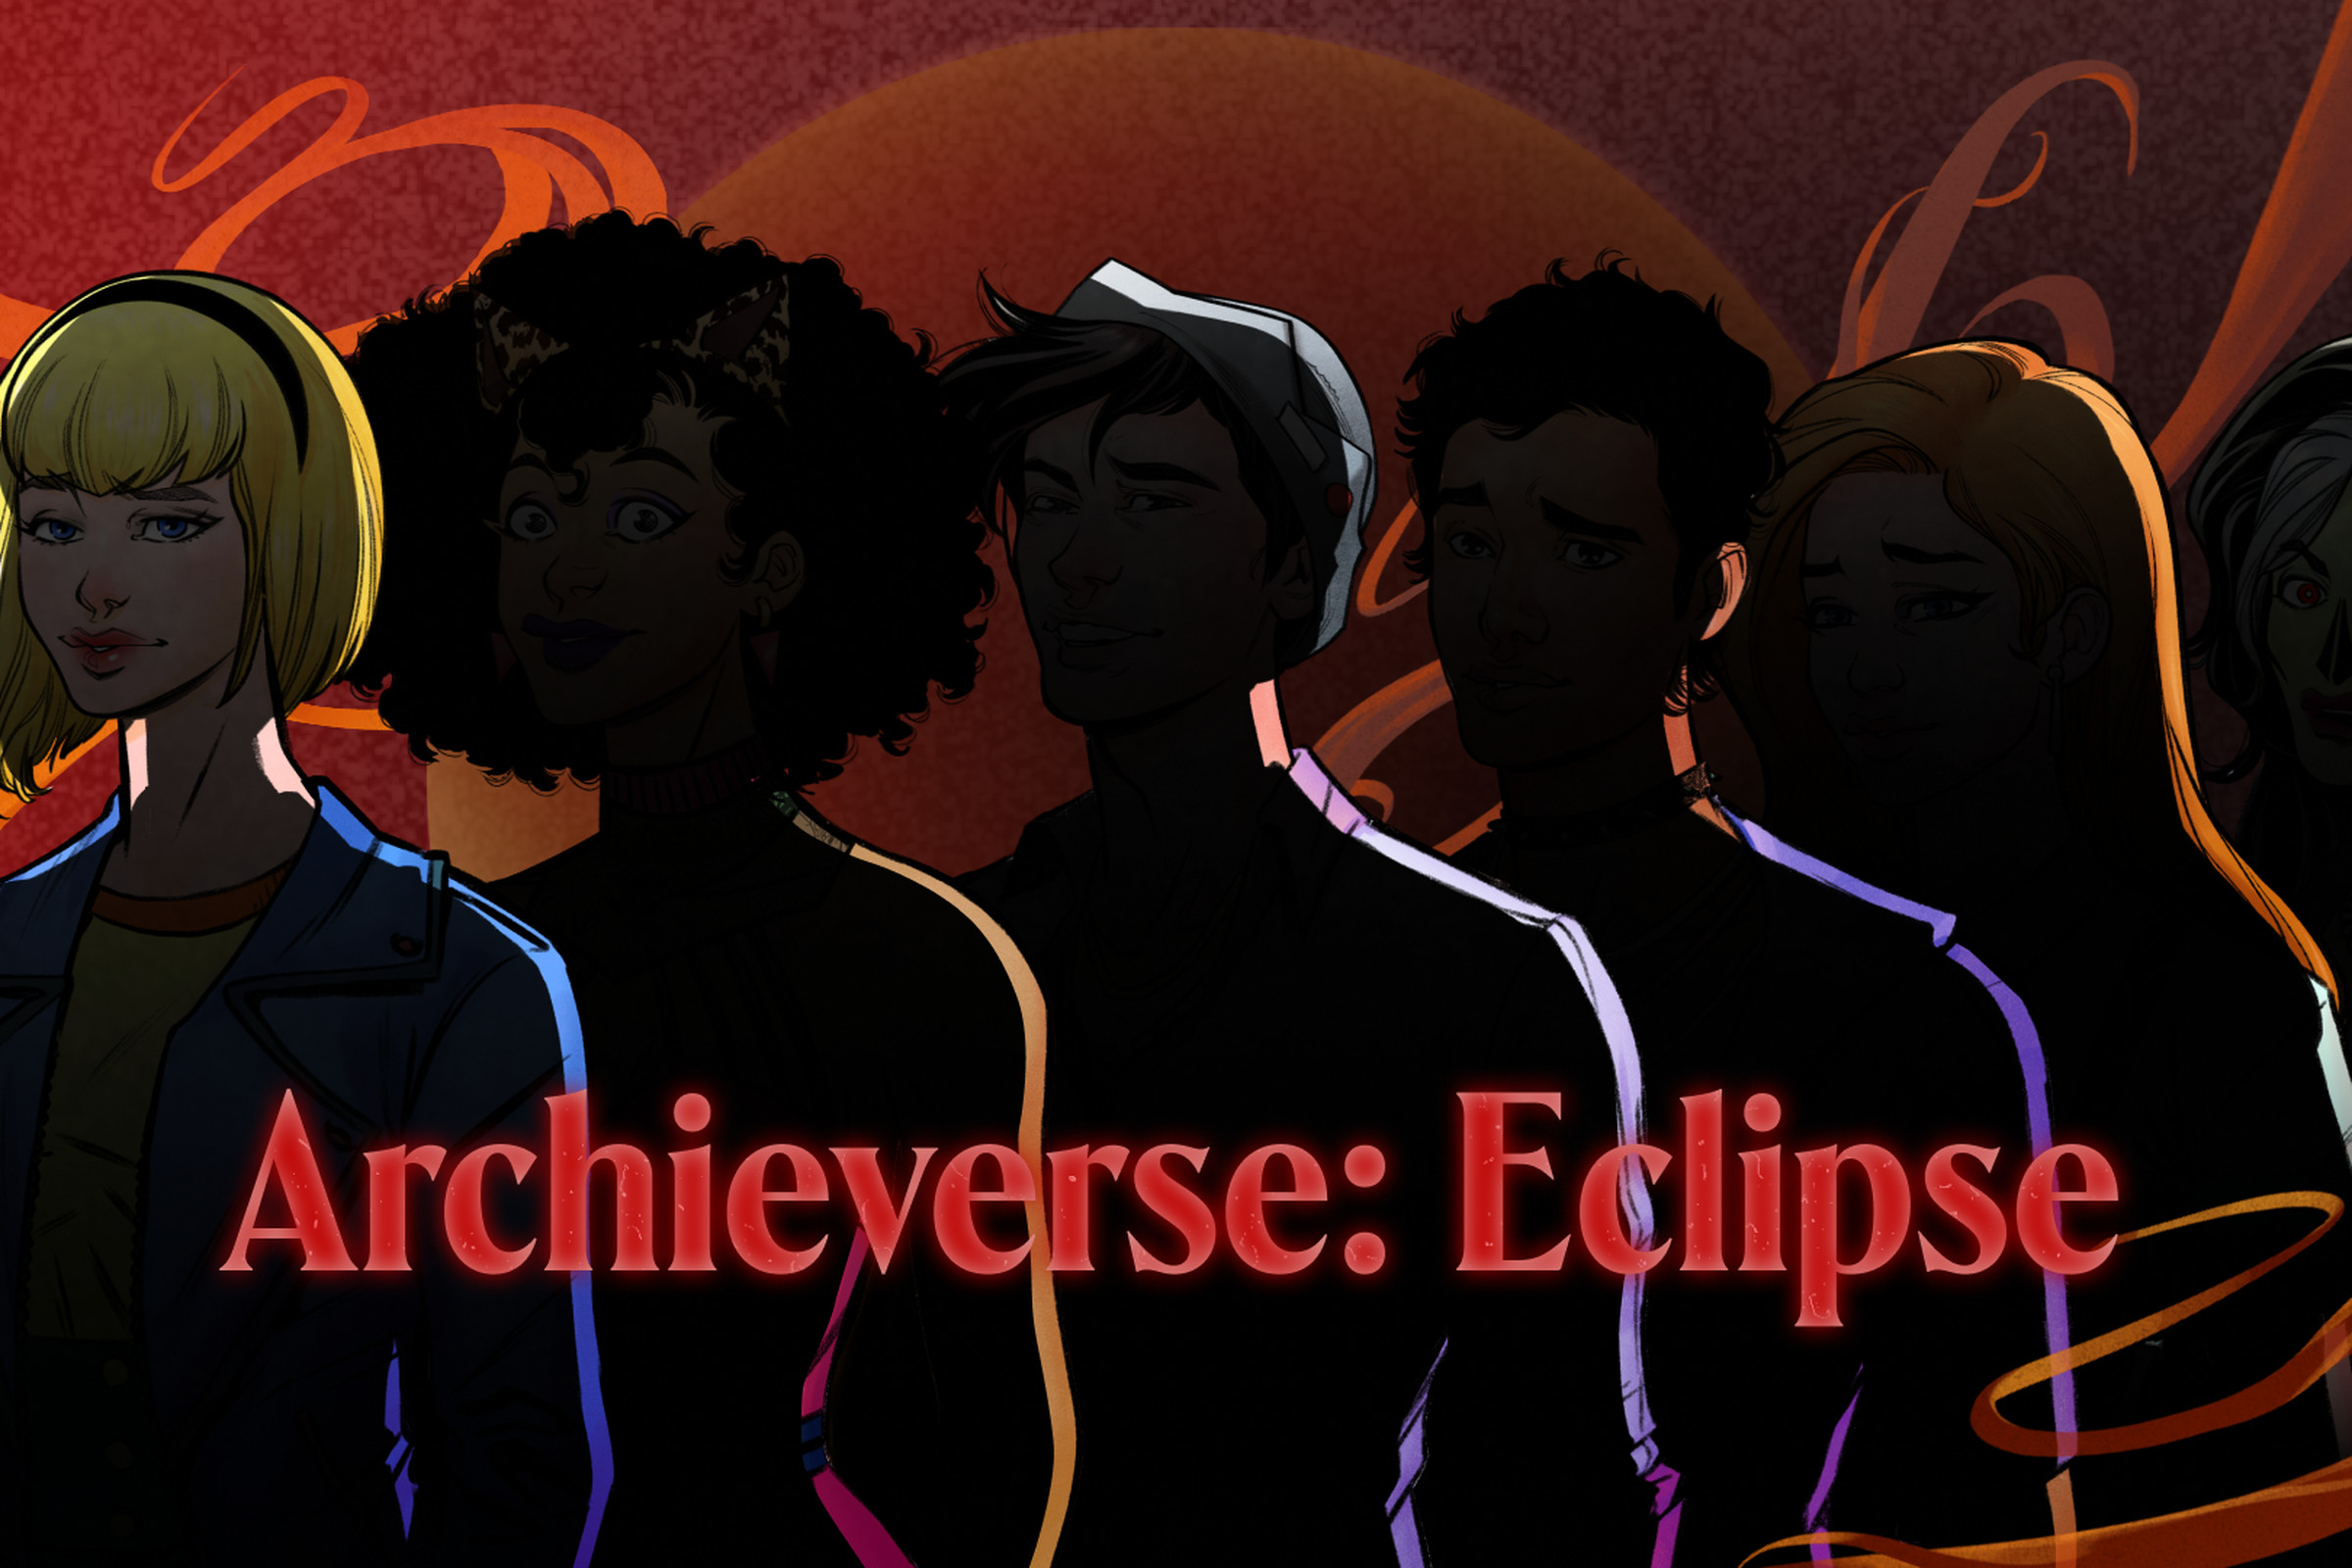 Silhouettes of generated NFT characters for Archieverse: Eclipse